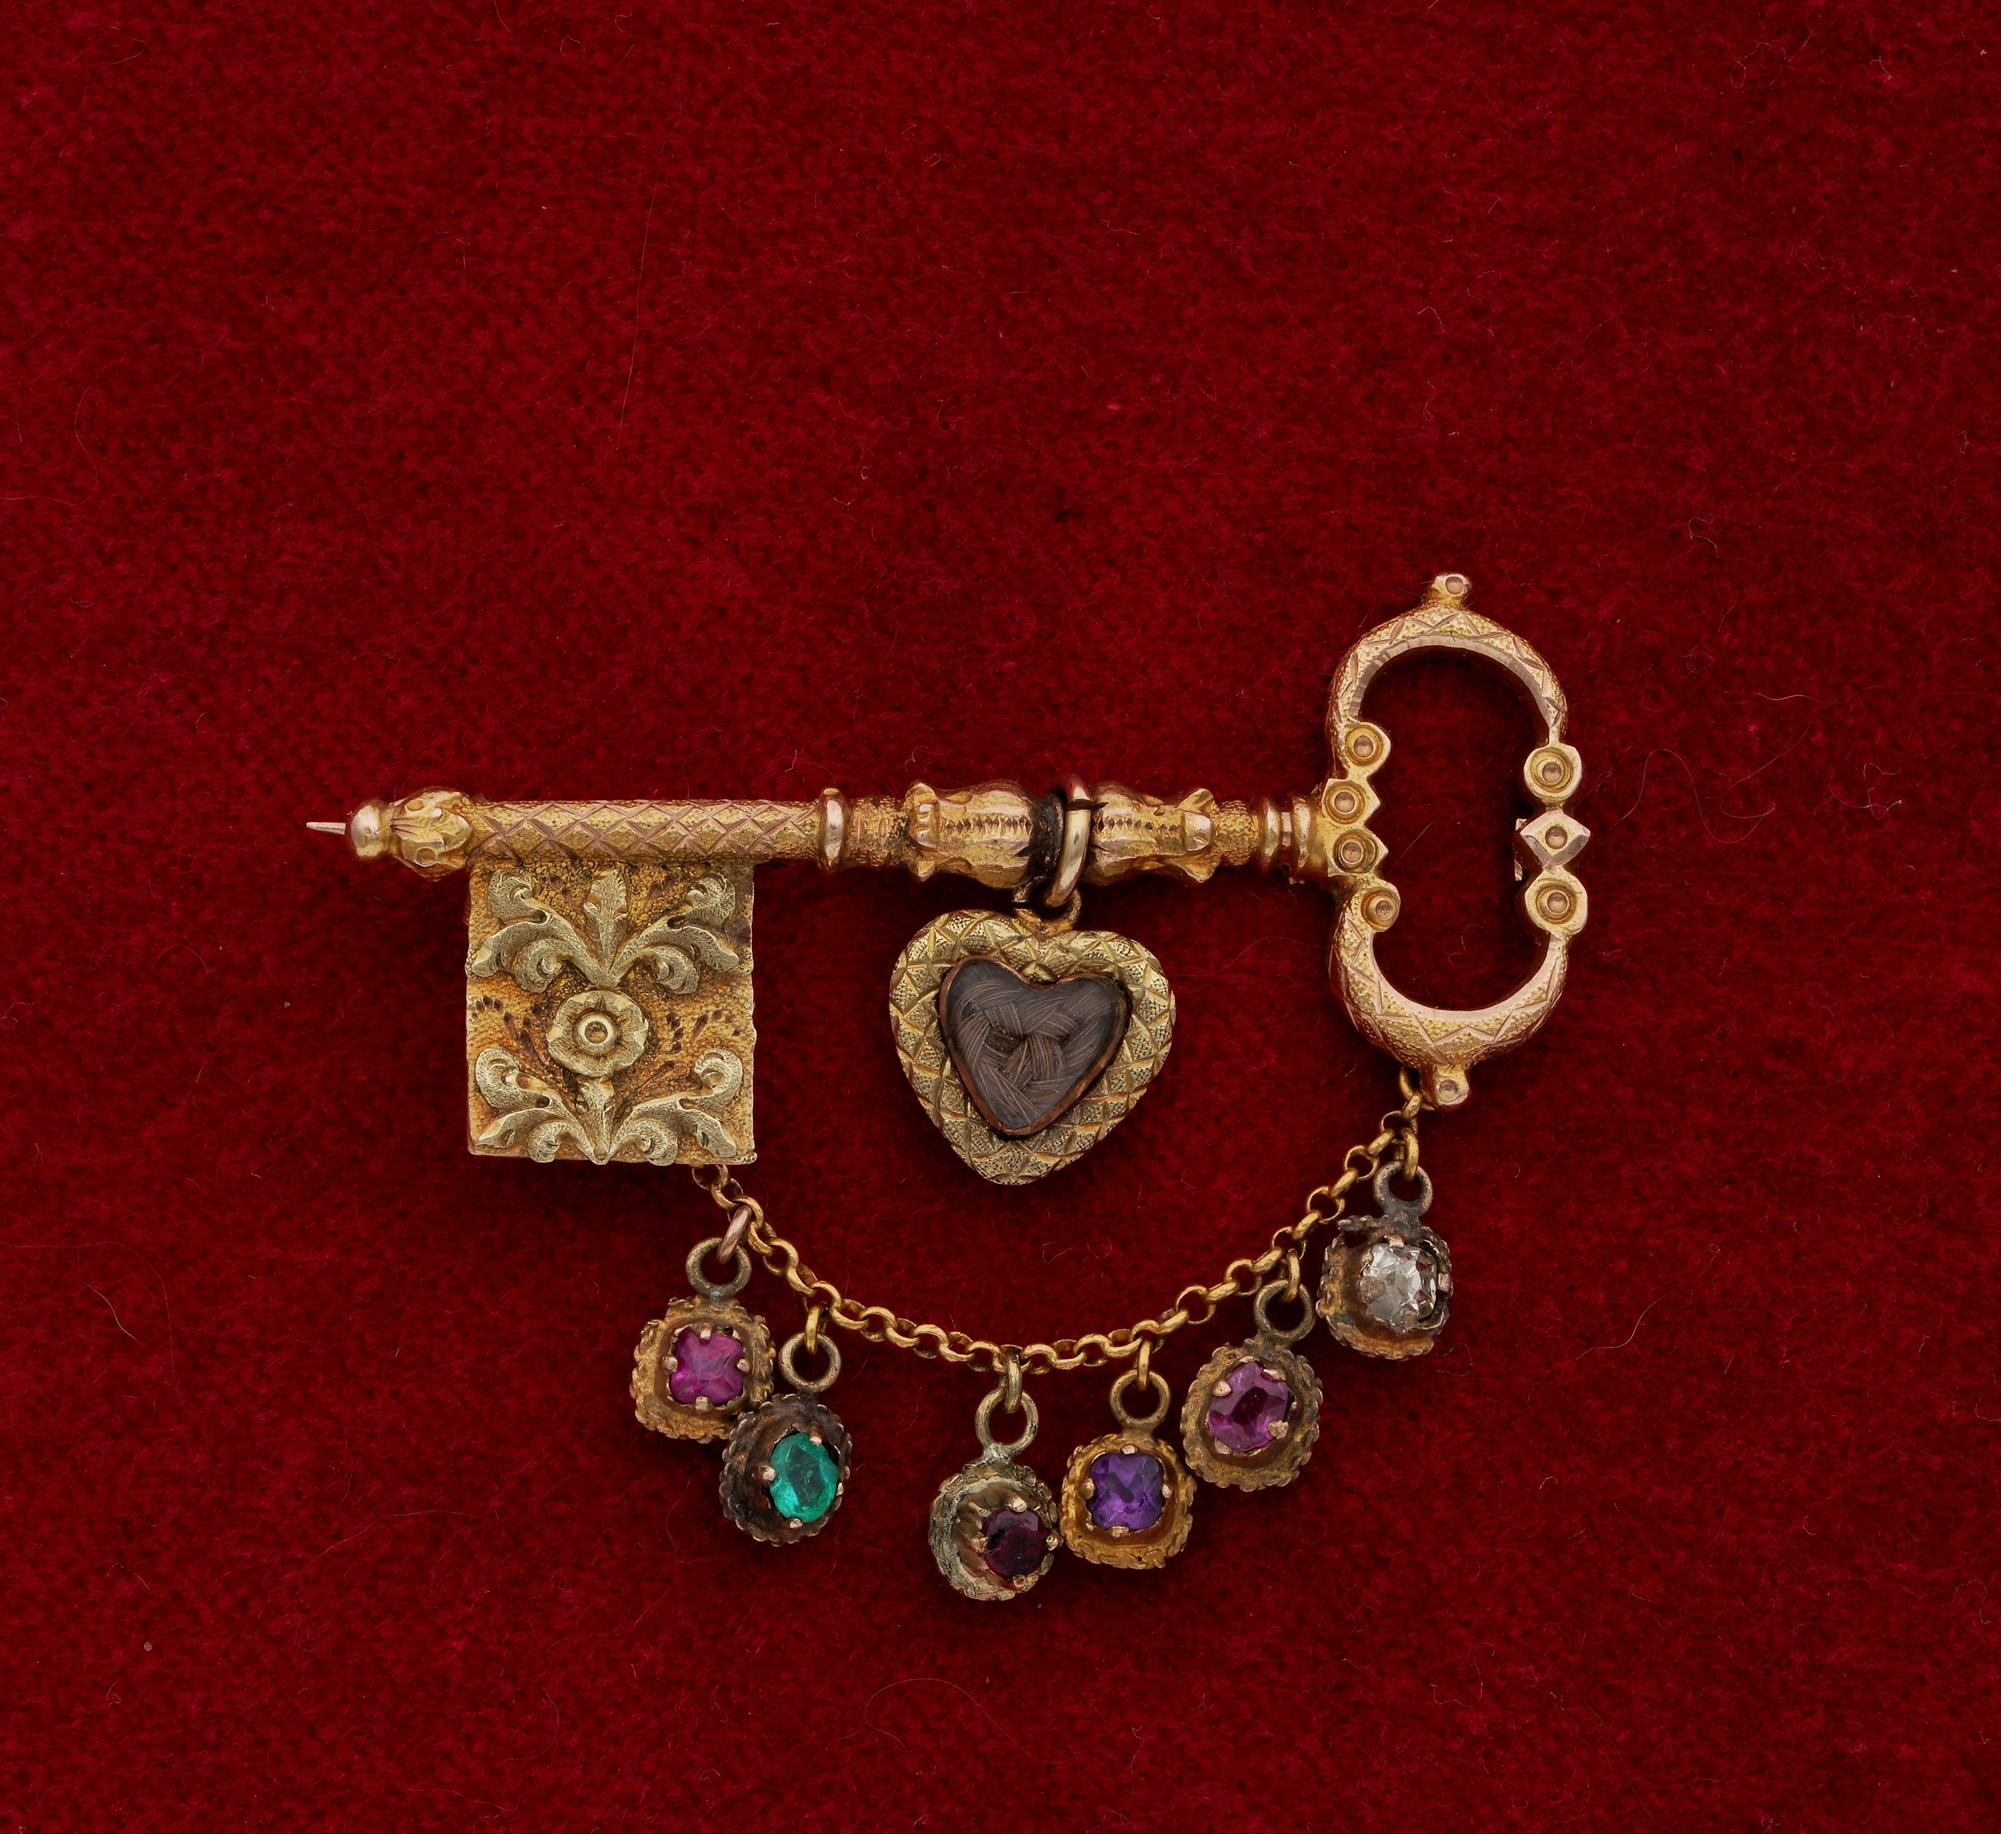 Love for Ever
Magnificent little treasure as survivor of a past pledge of love will please the next keeper with its un discussed beauty and hidden secret tales of love
Georgian period from the early 19th Century, this ‘ key to my heart’ brooch